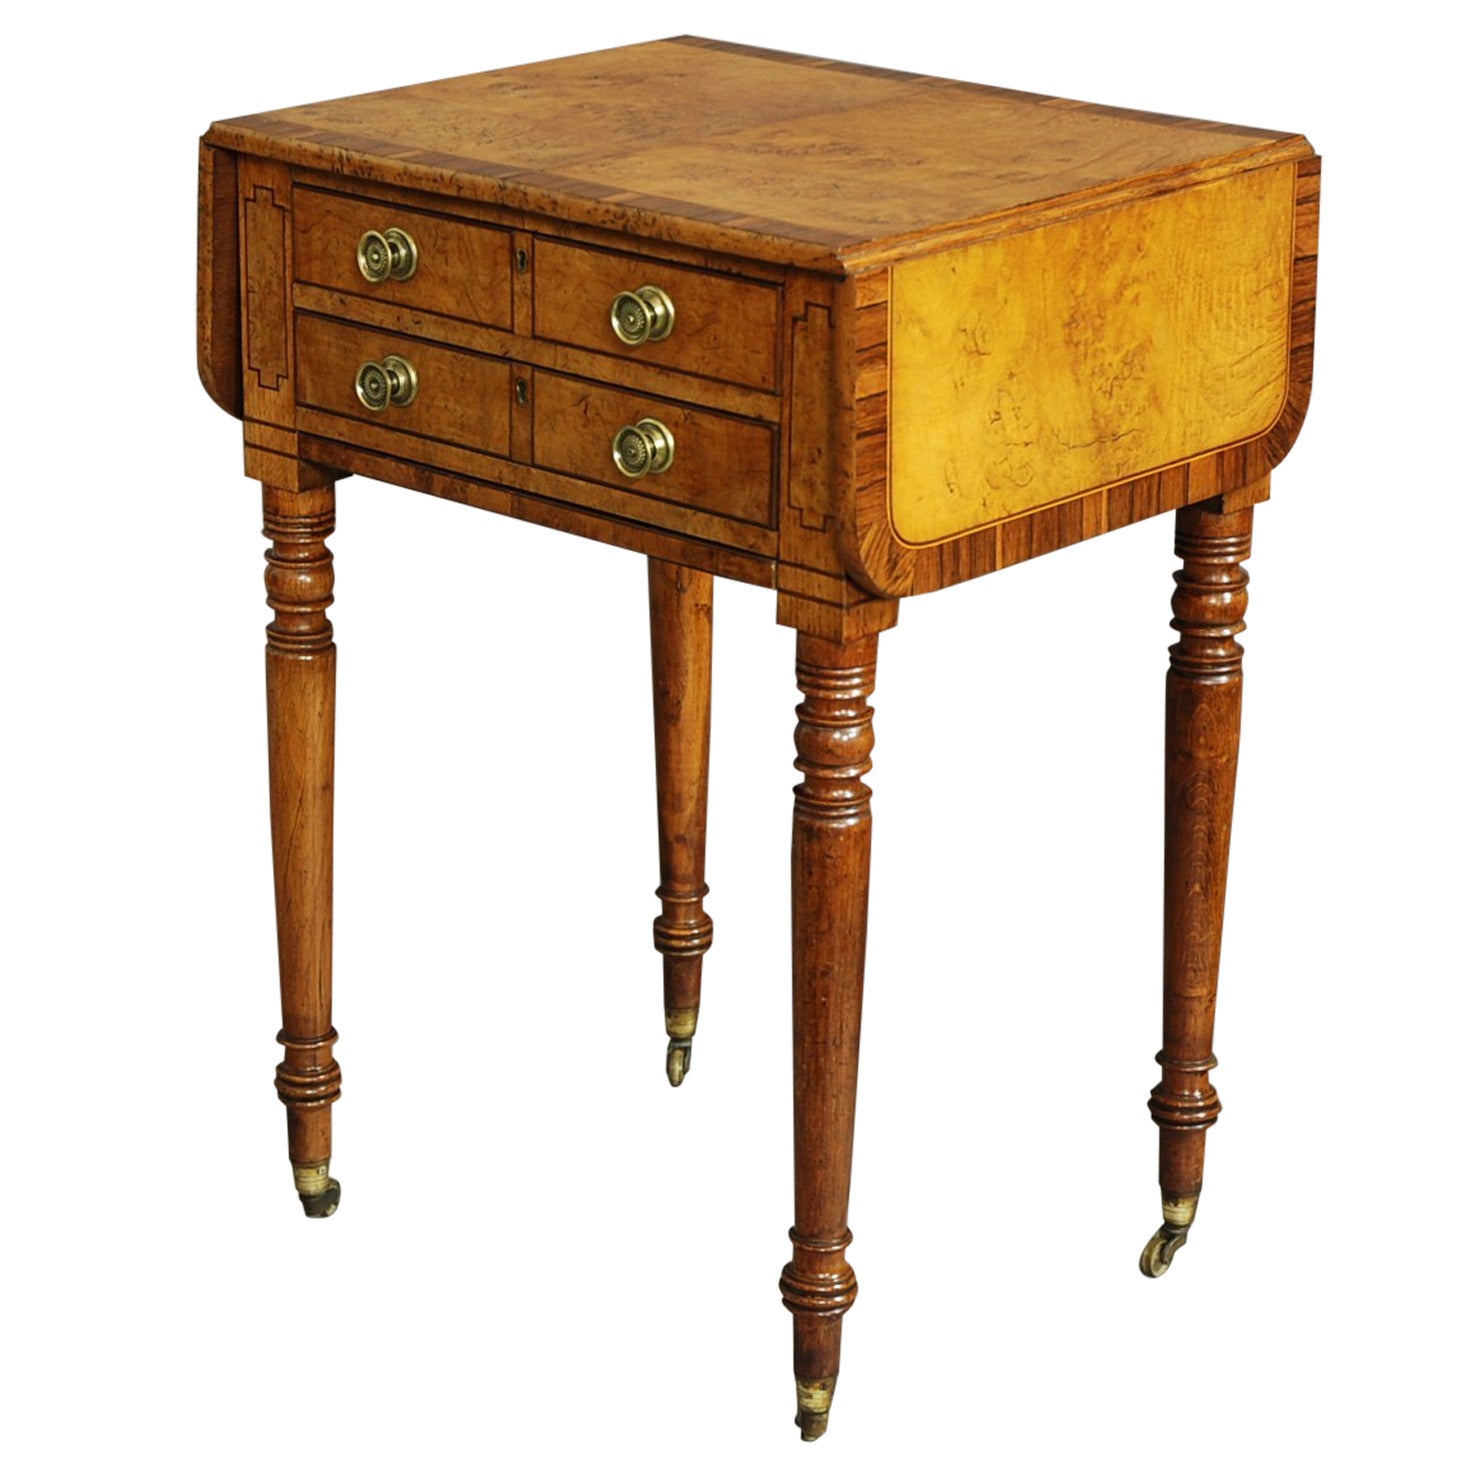 Early 19th Century Burr Oak Work Table with Patina